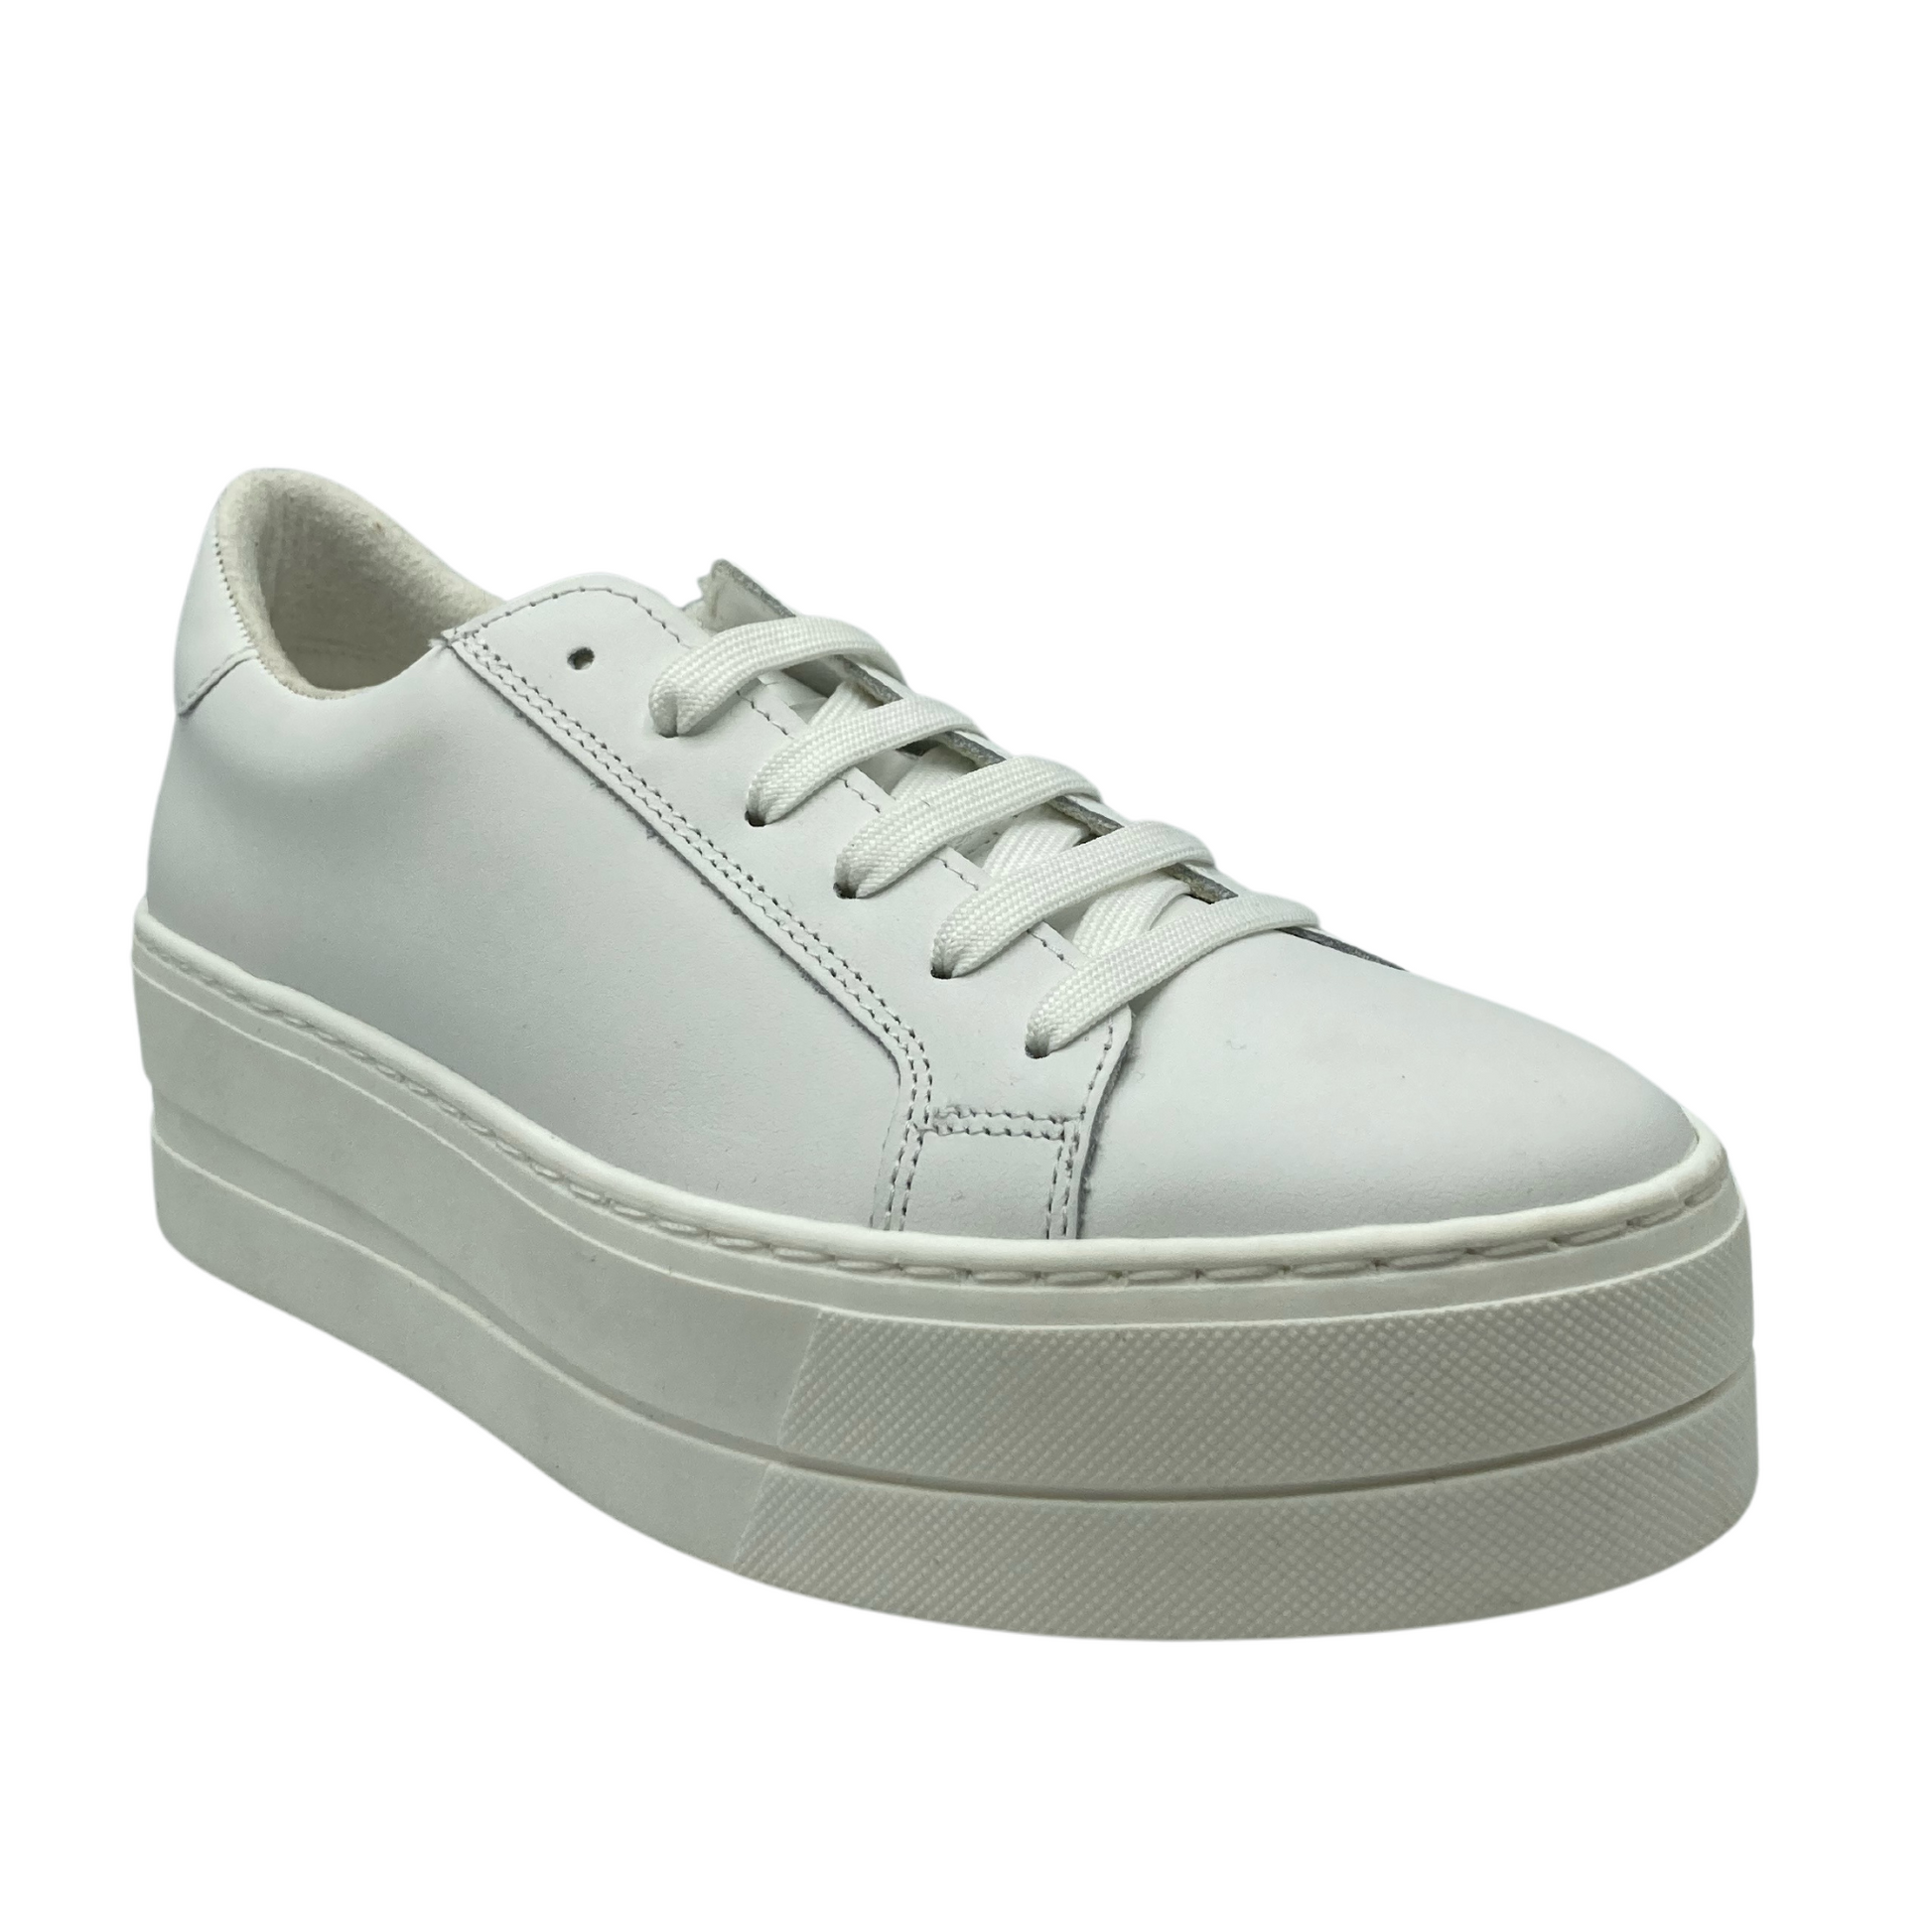 45 degree angled view of white leather sneaker with white rubber platform sole